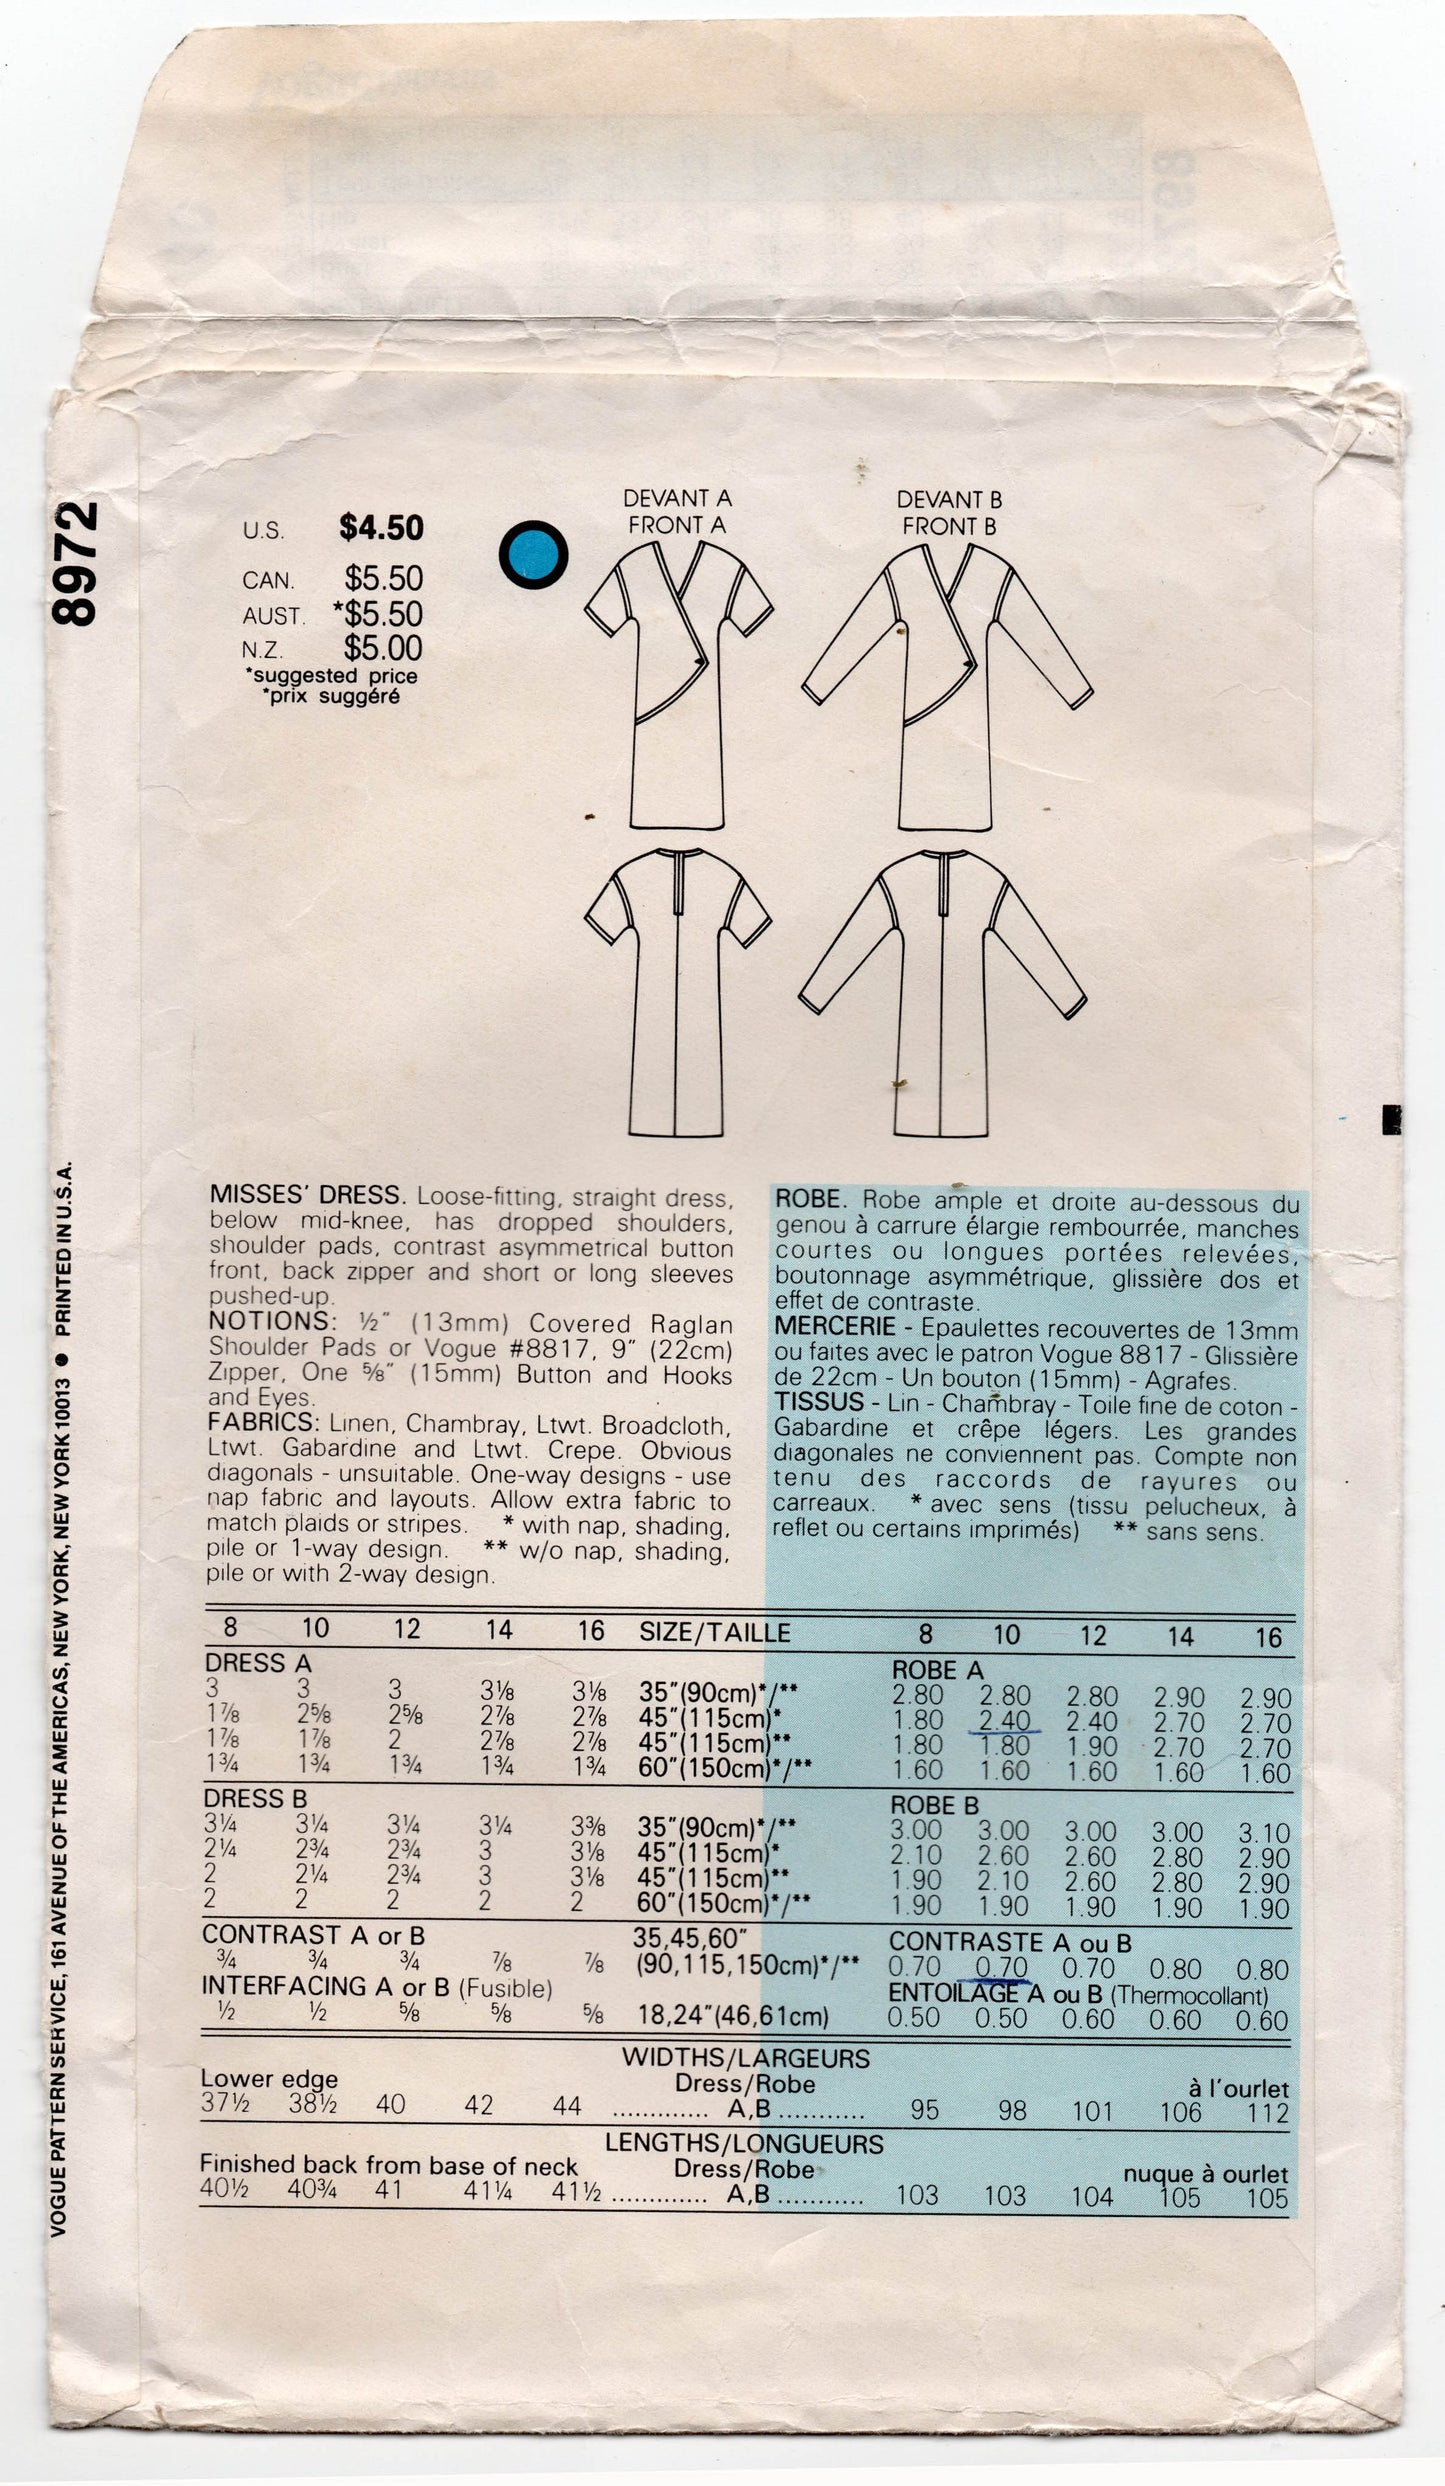 Vogue 8972 Womens Asymmetrical Dress 1980s Vintage Sewing Pattern Size 10 Bust 32.5 inches